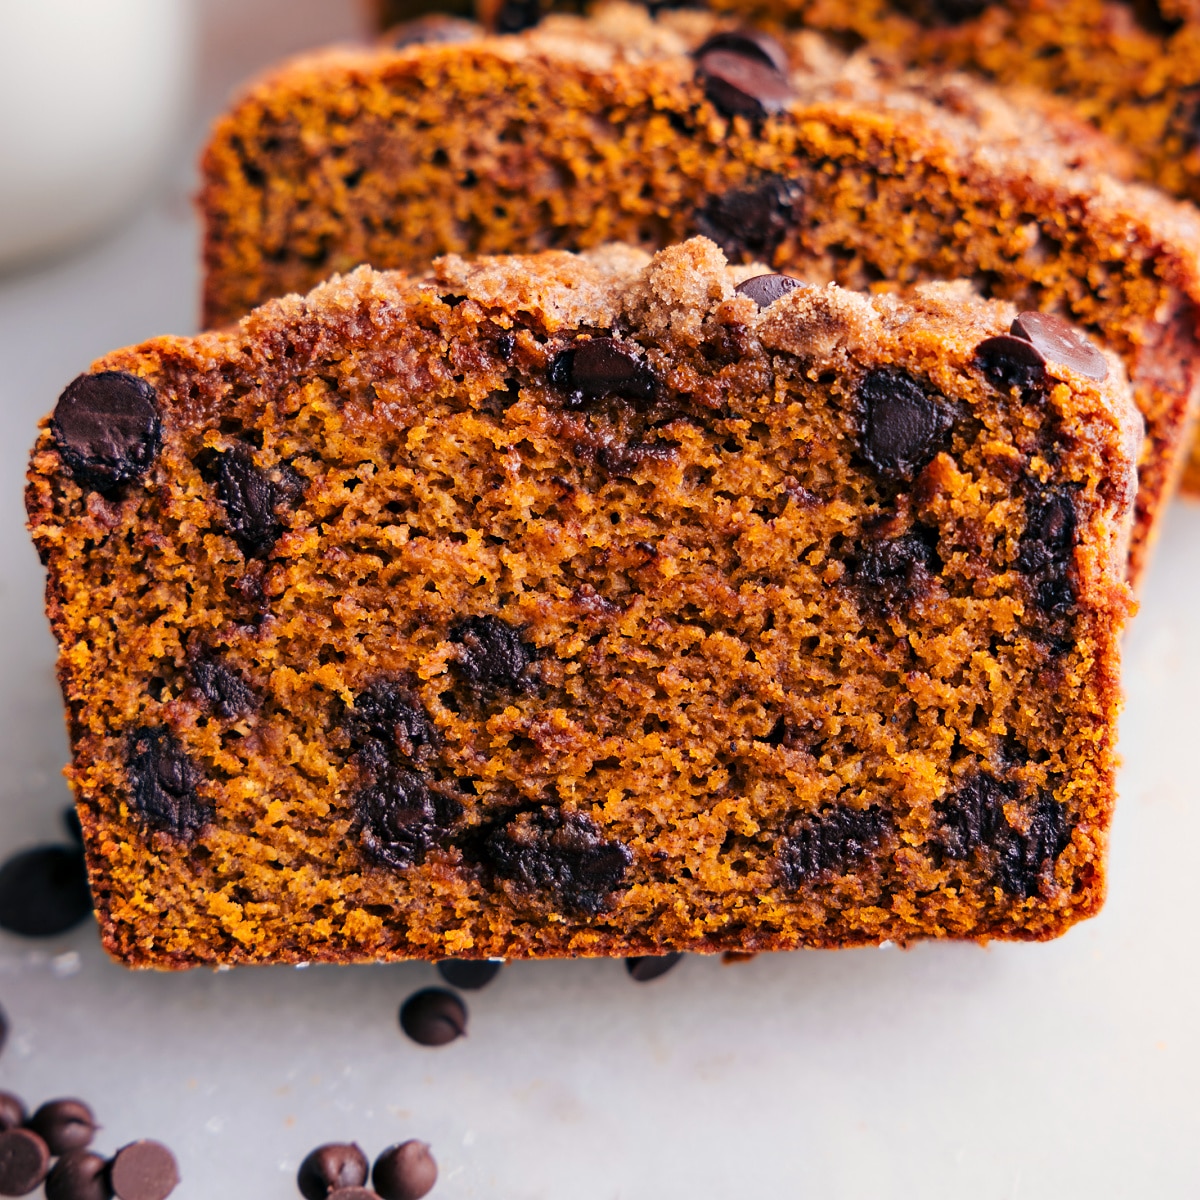 Delicious moist pumpkin bread, with chocolate chips throughout.